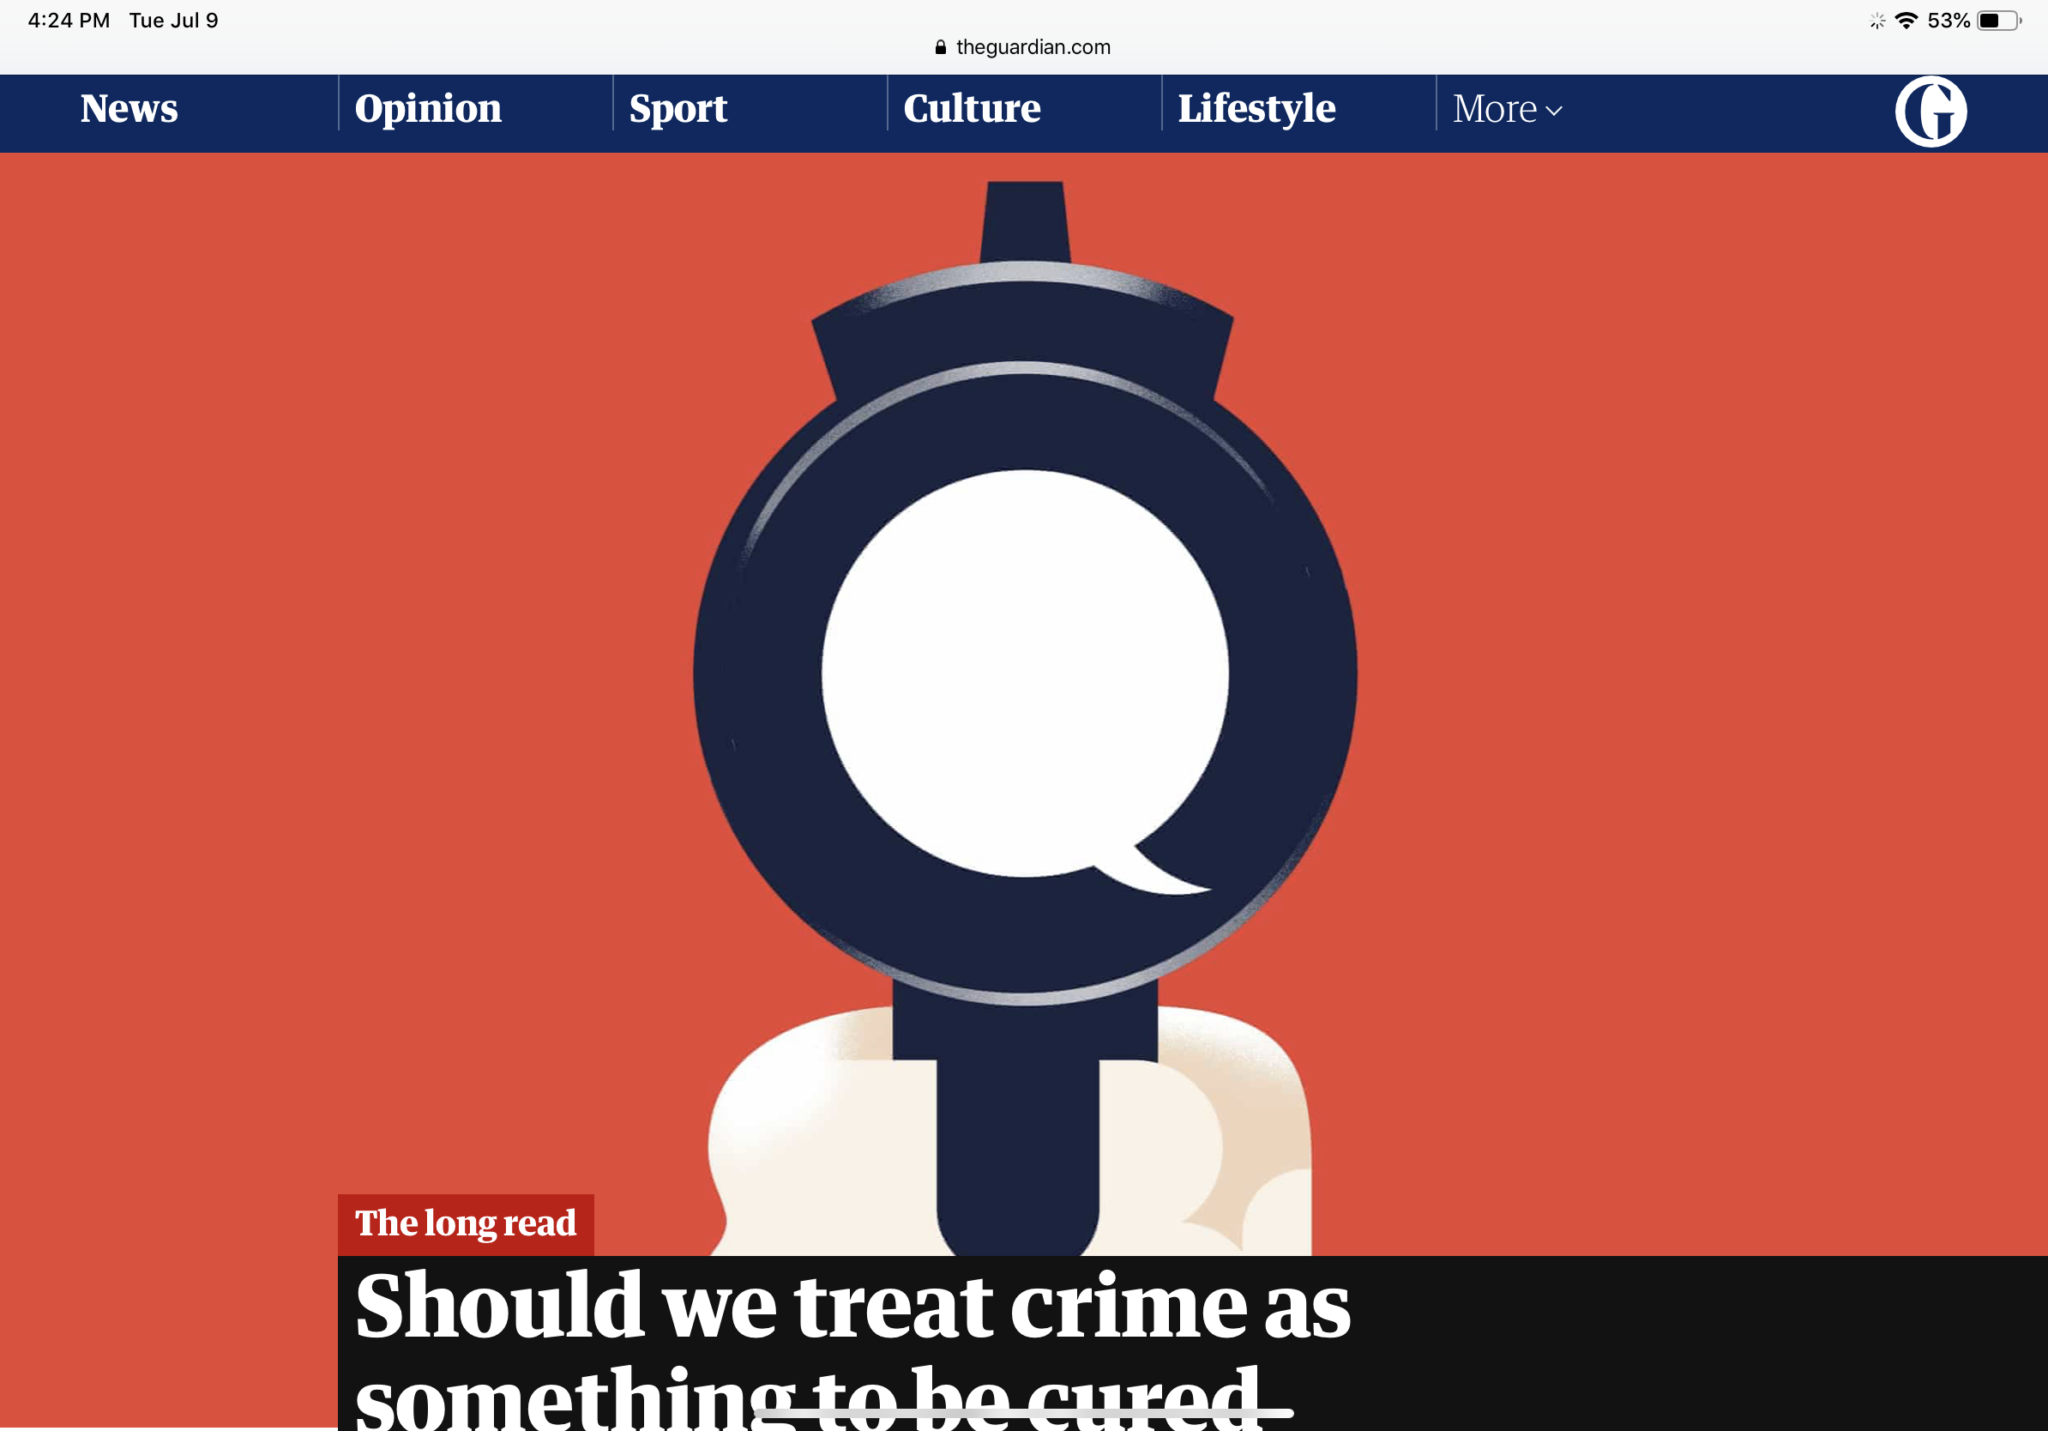 Guardian: Should We Treat Crime As Something To Be Cured